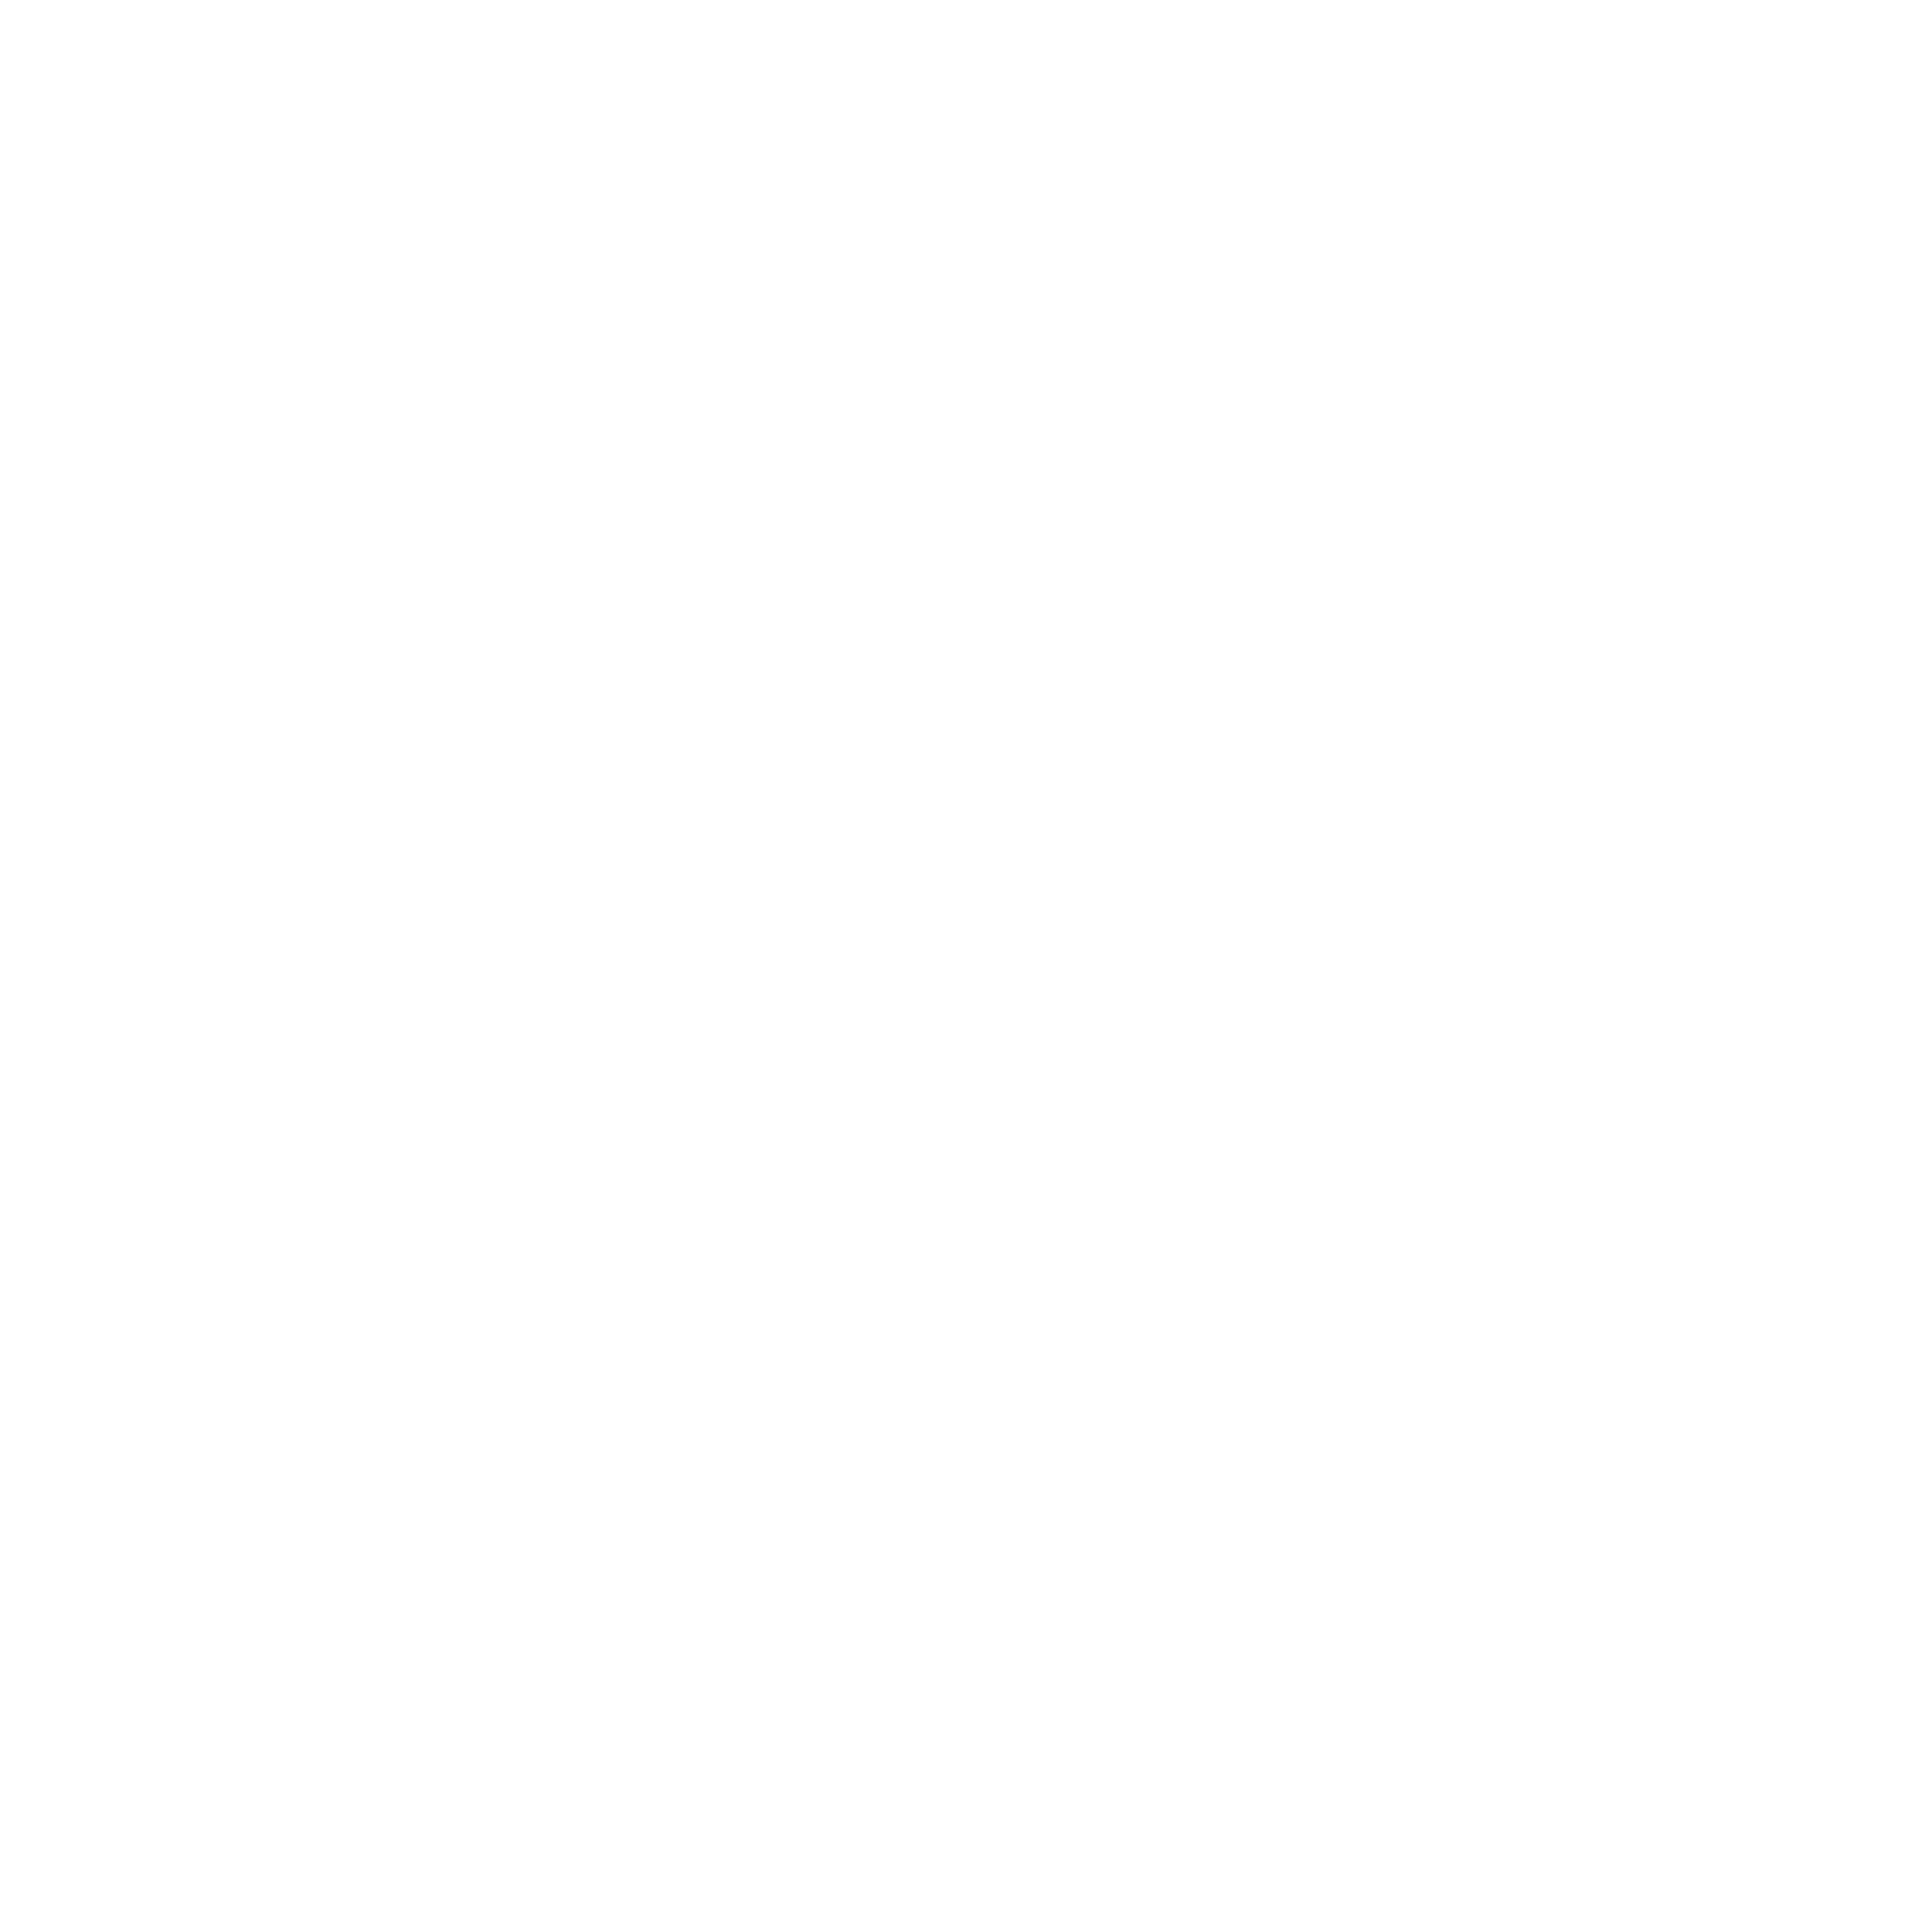 Family First Funerals & Cremations Logo